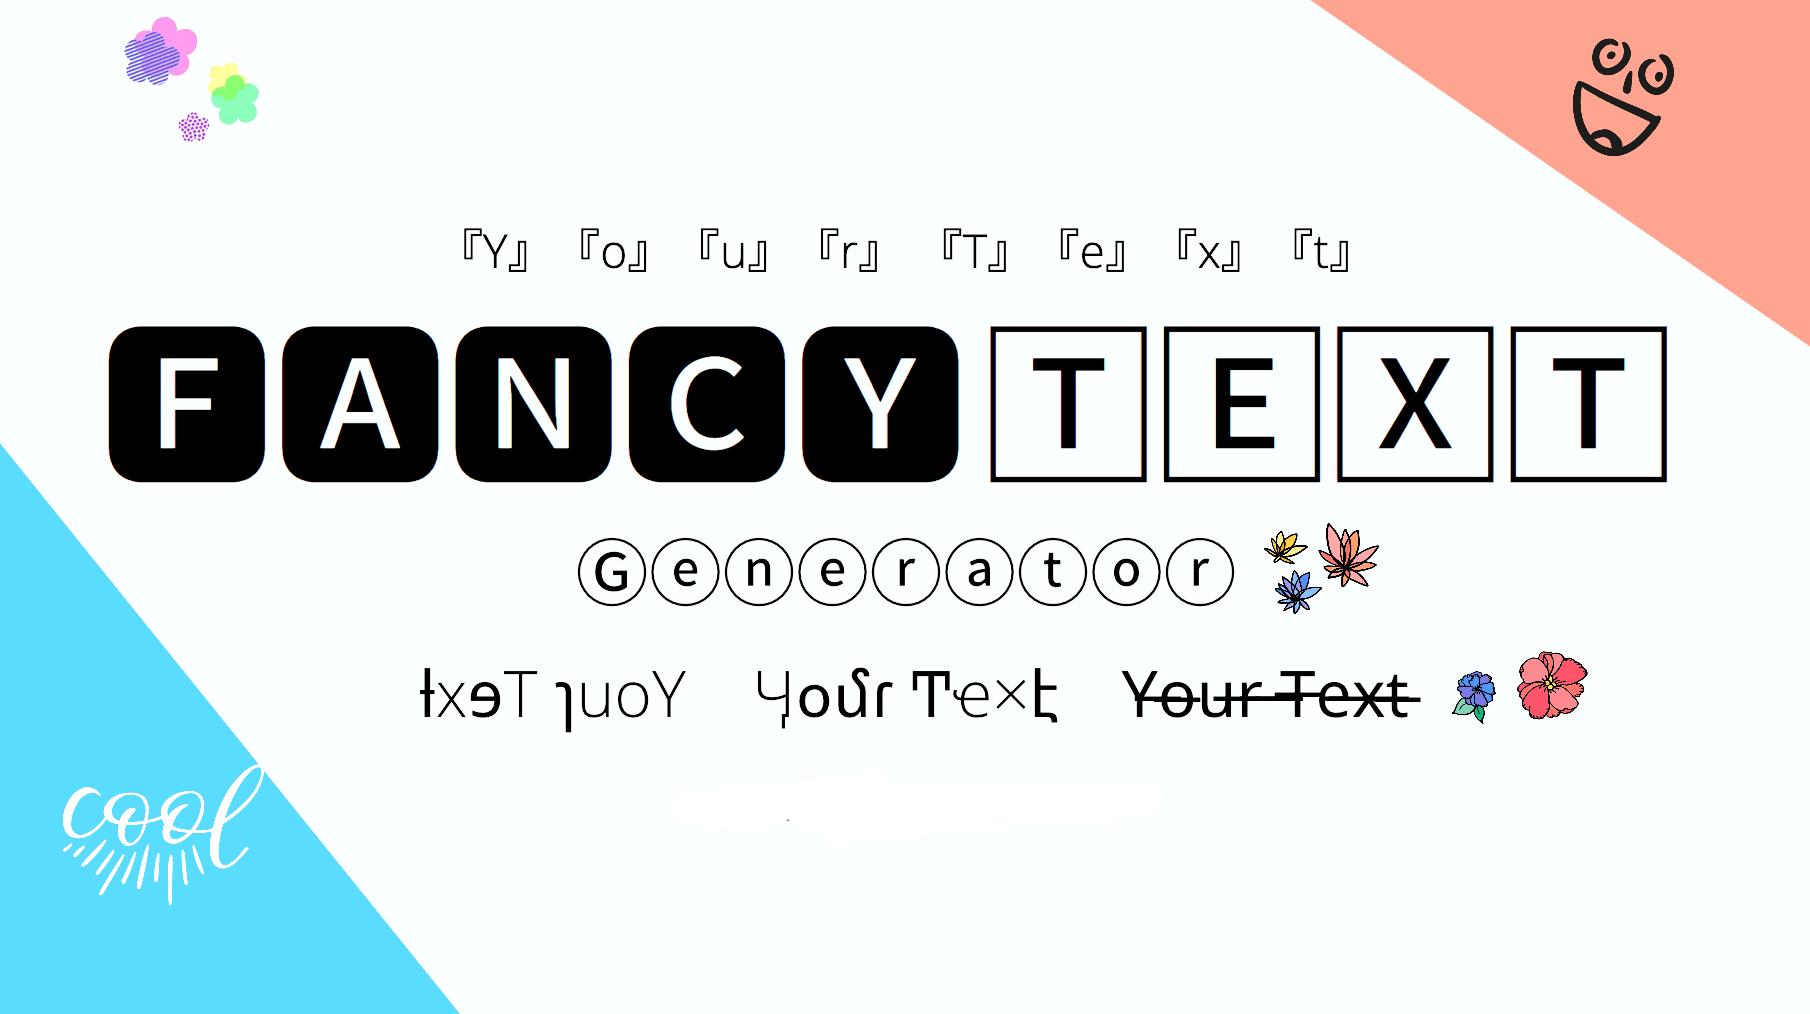 Fancy Text - Stylish Text Generator for Android - APK Download